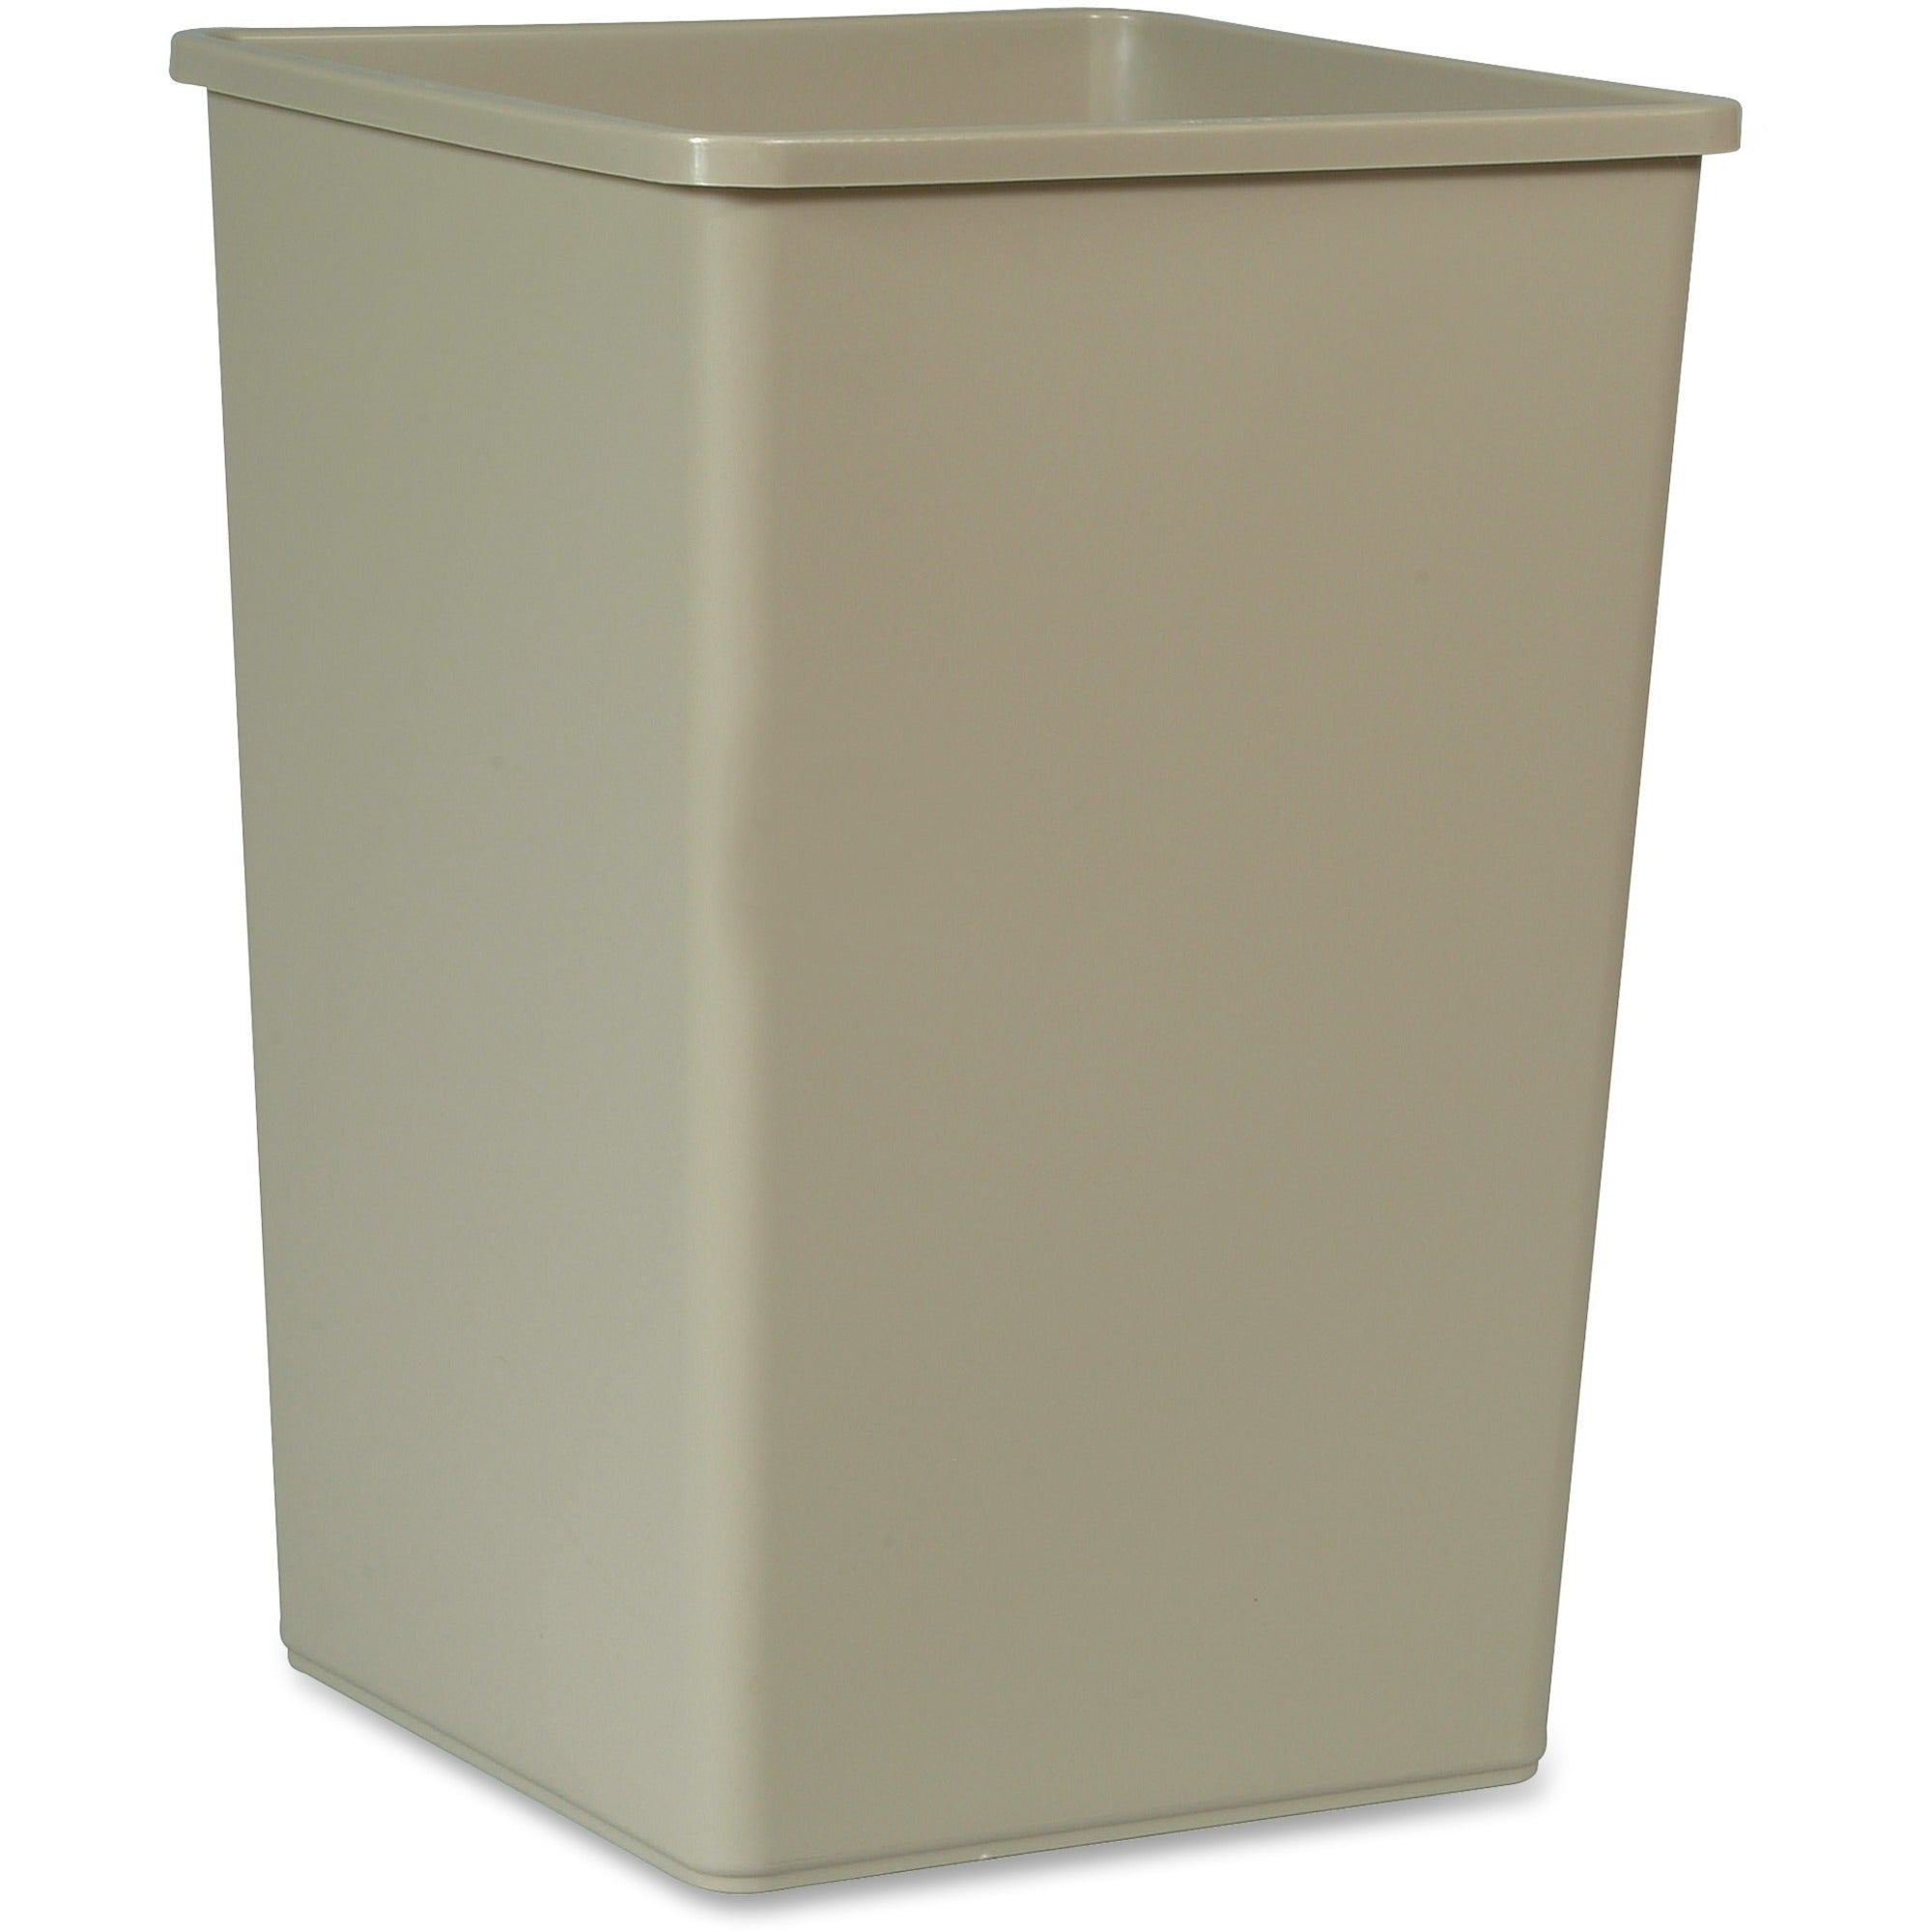 Rubbermaid Commercial Untouchable Square Container - 35 gal Capacity - Square - Durable, Crack Resistant, Rugged, Compact - Plastic - Beige - 1 Each - 